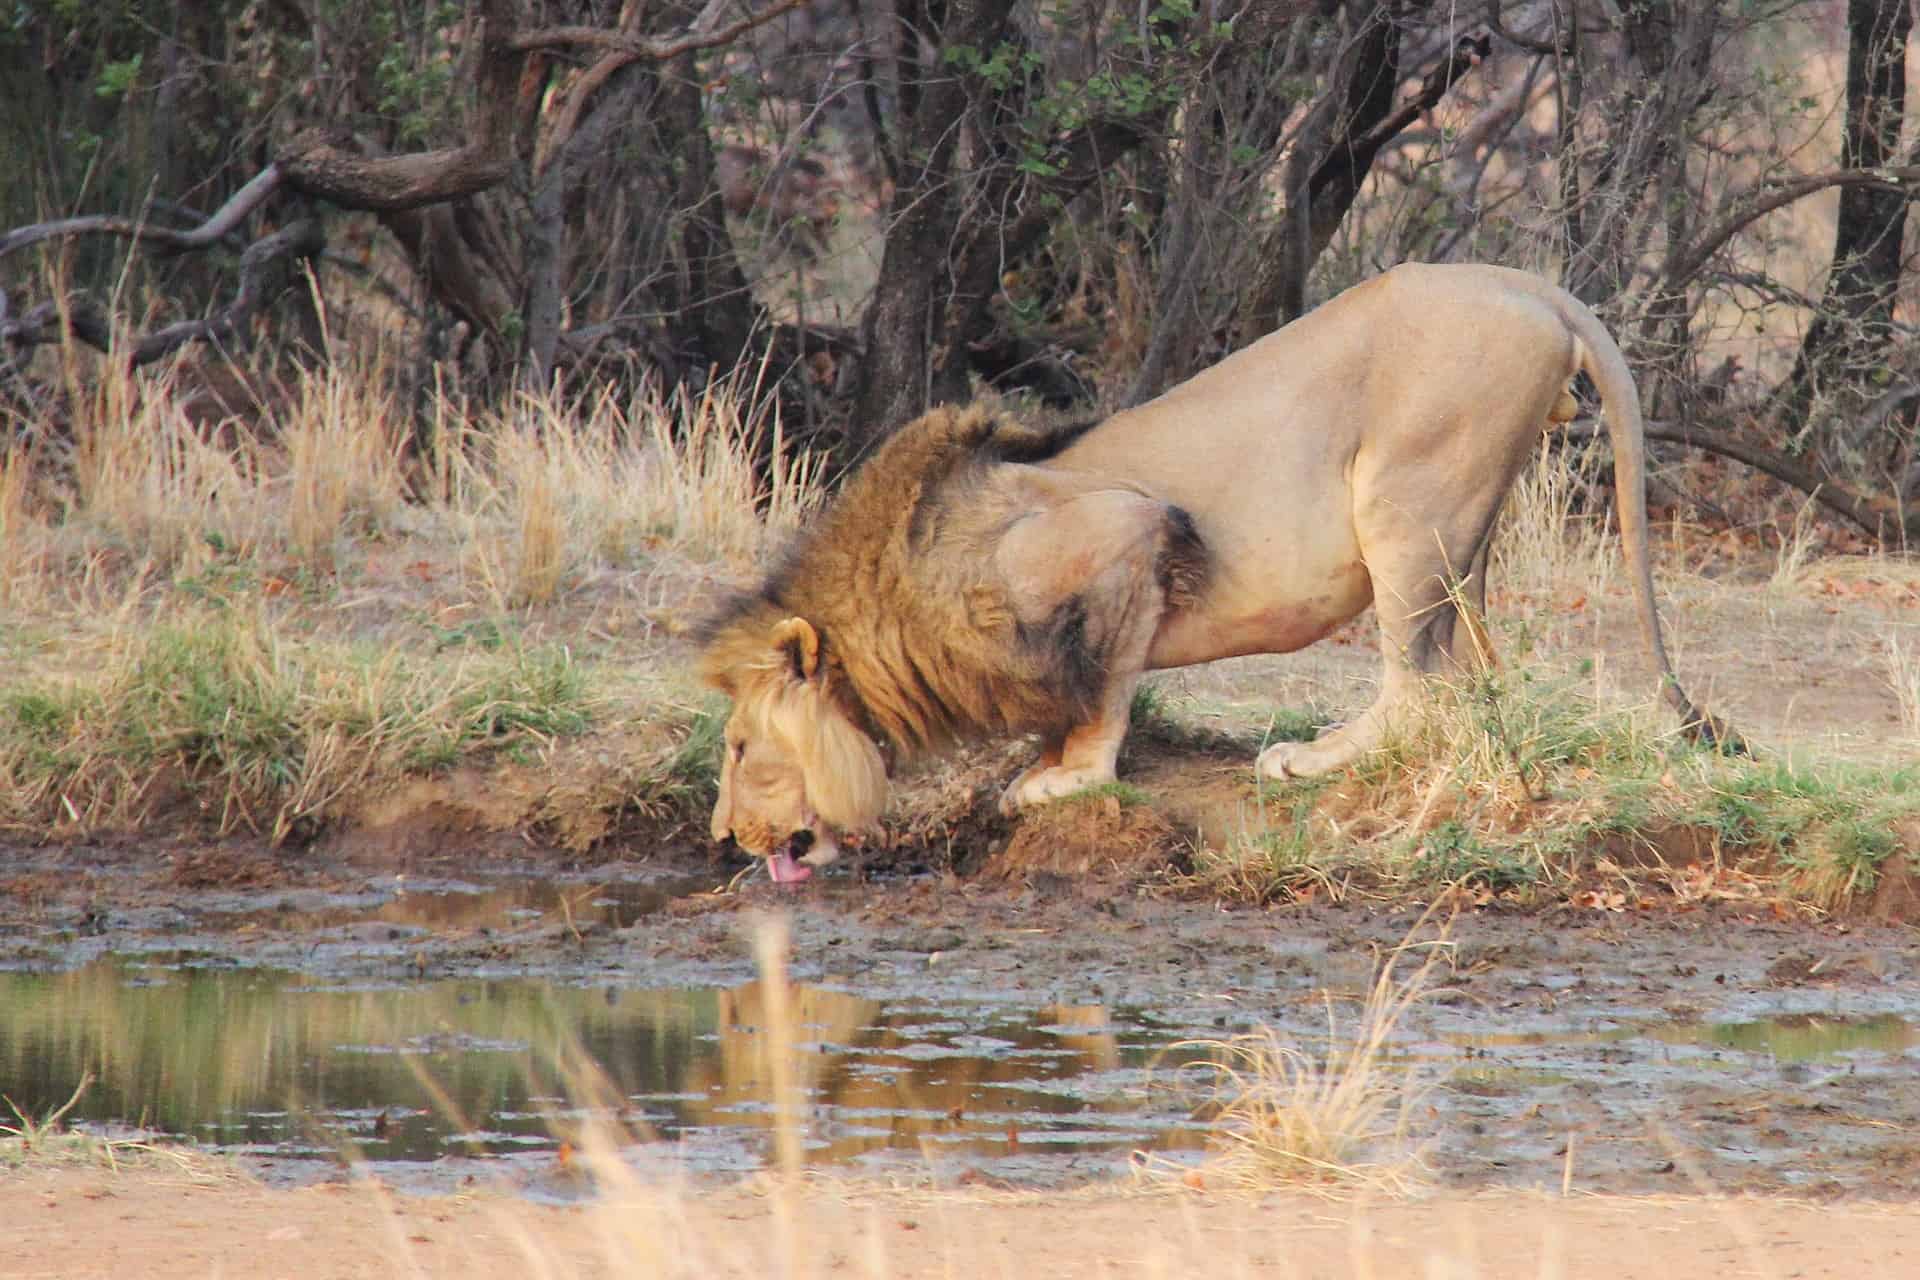 Best things to do in Johannesburg South Africa - Kenzeo Mpoyi - Lion drinking water by Sharon Ang on Pixabay